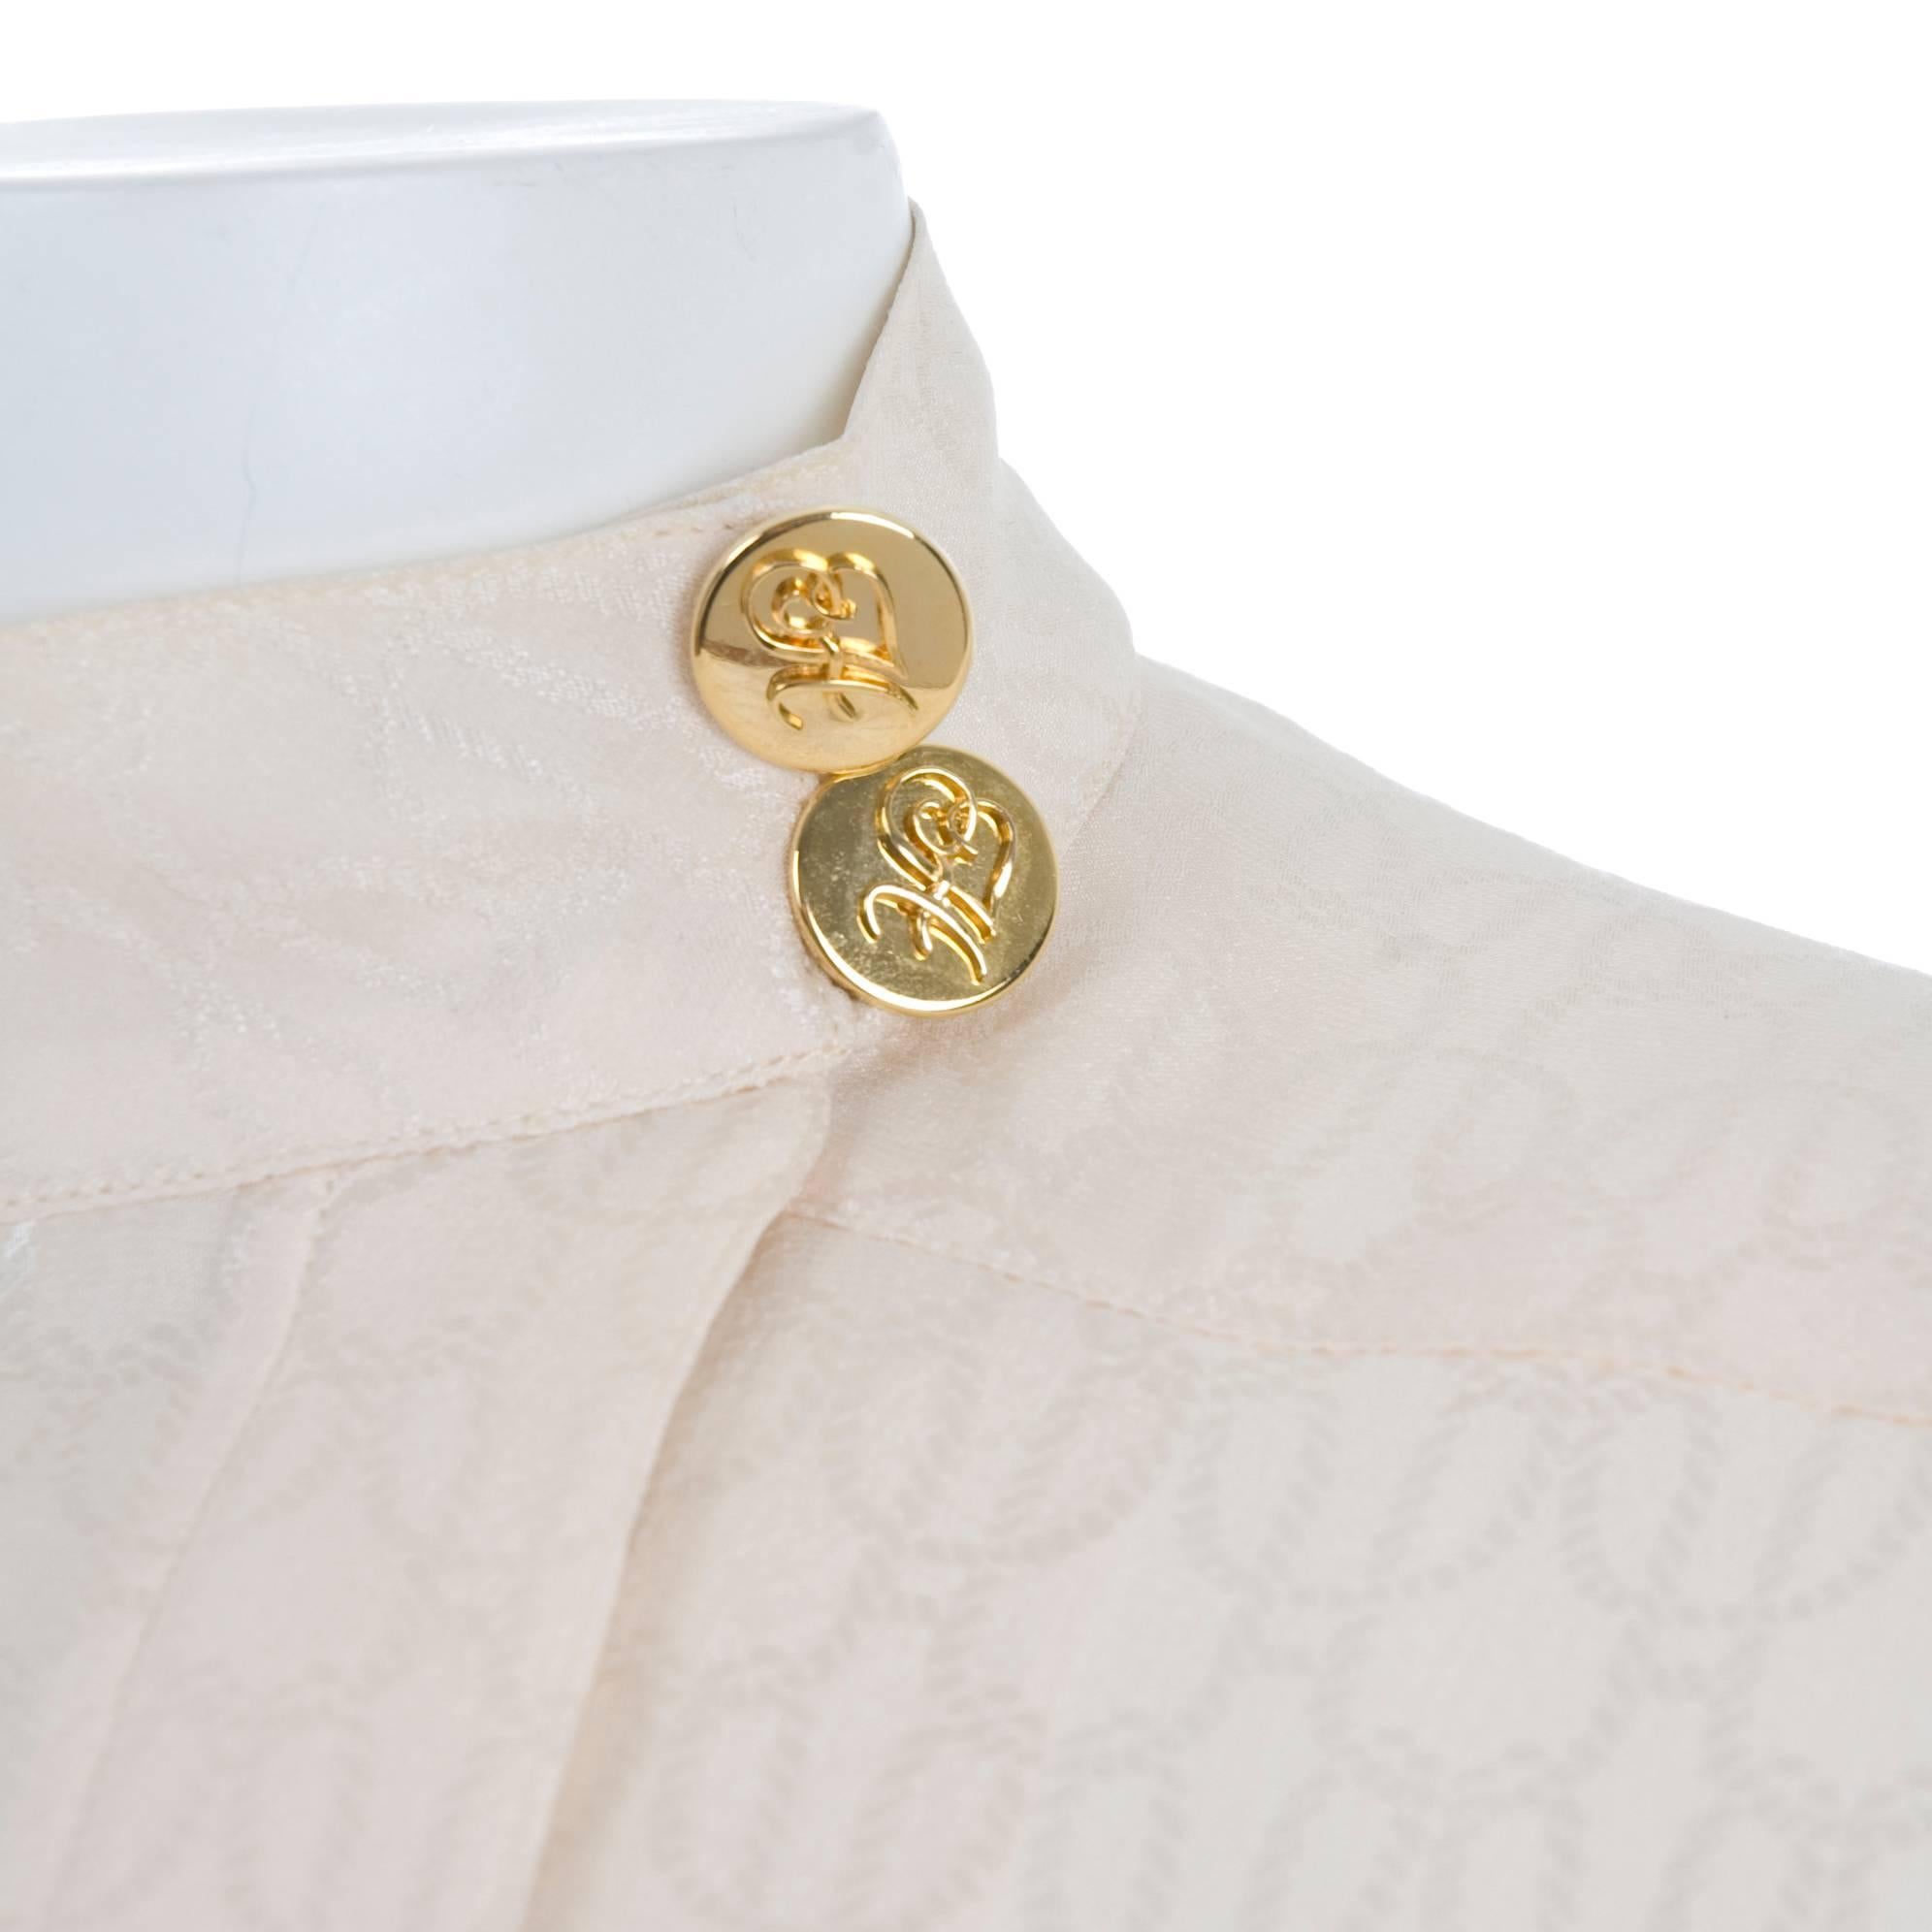 Vintage Hermes Jacquard creme silk blouse with gilded H logo buttons.
Two extra buttons in the side seam.
There is a tiny spot on the back, please see picture.
Other than the spot is the condition excellent.
Size 42 France 6 - 8